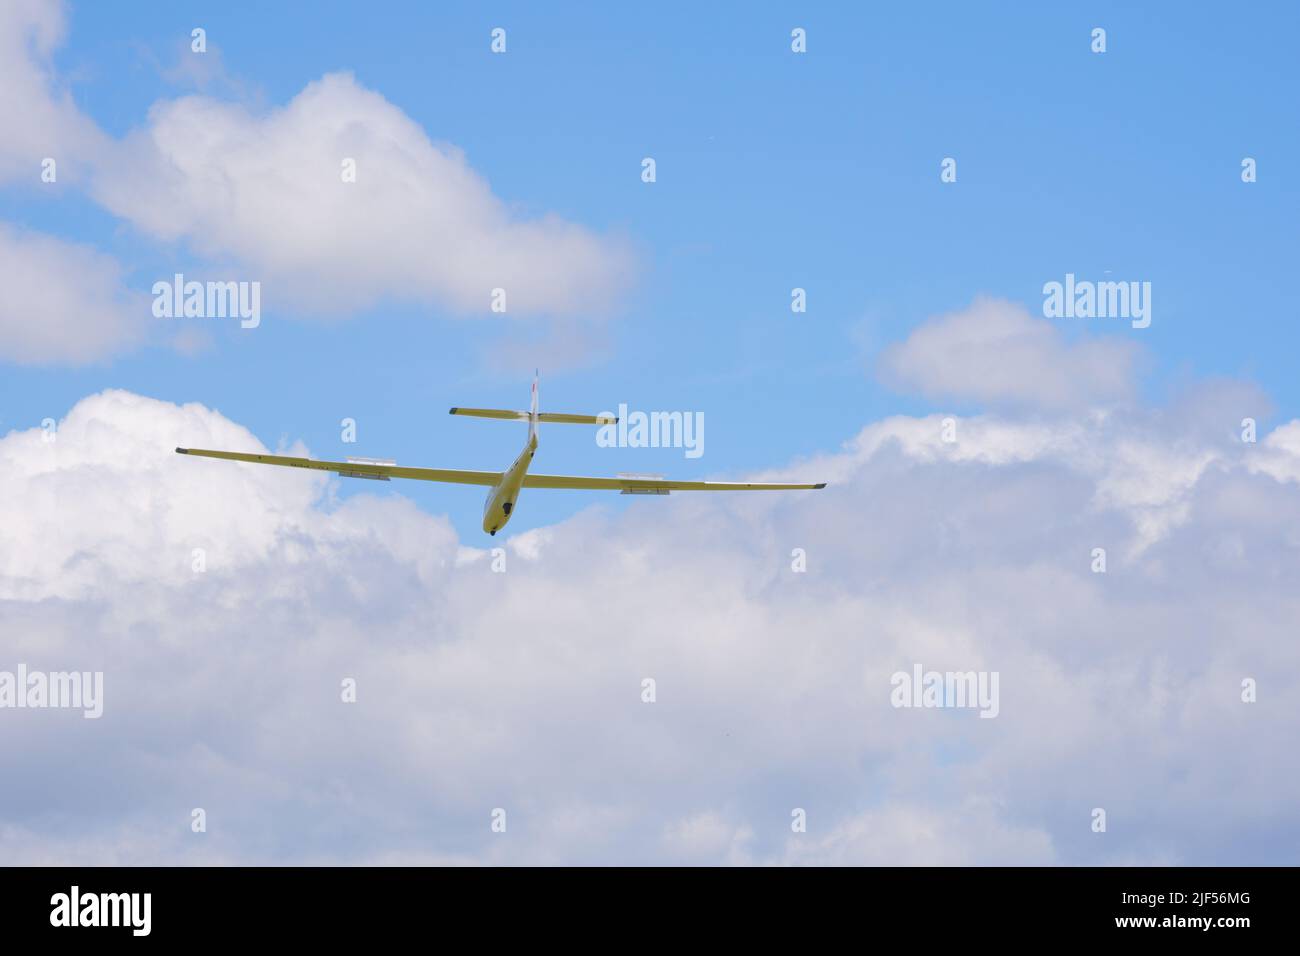 Glider flying high at blue sky with light clouds Stock Photo